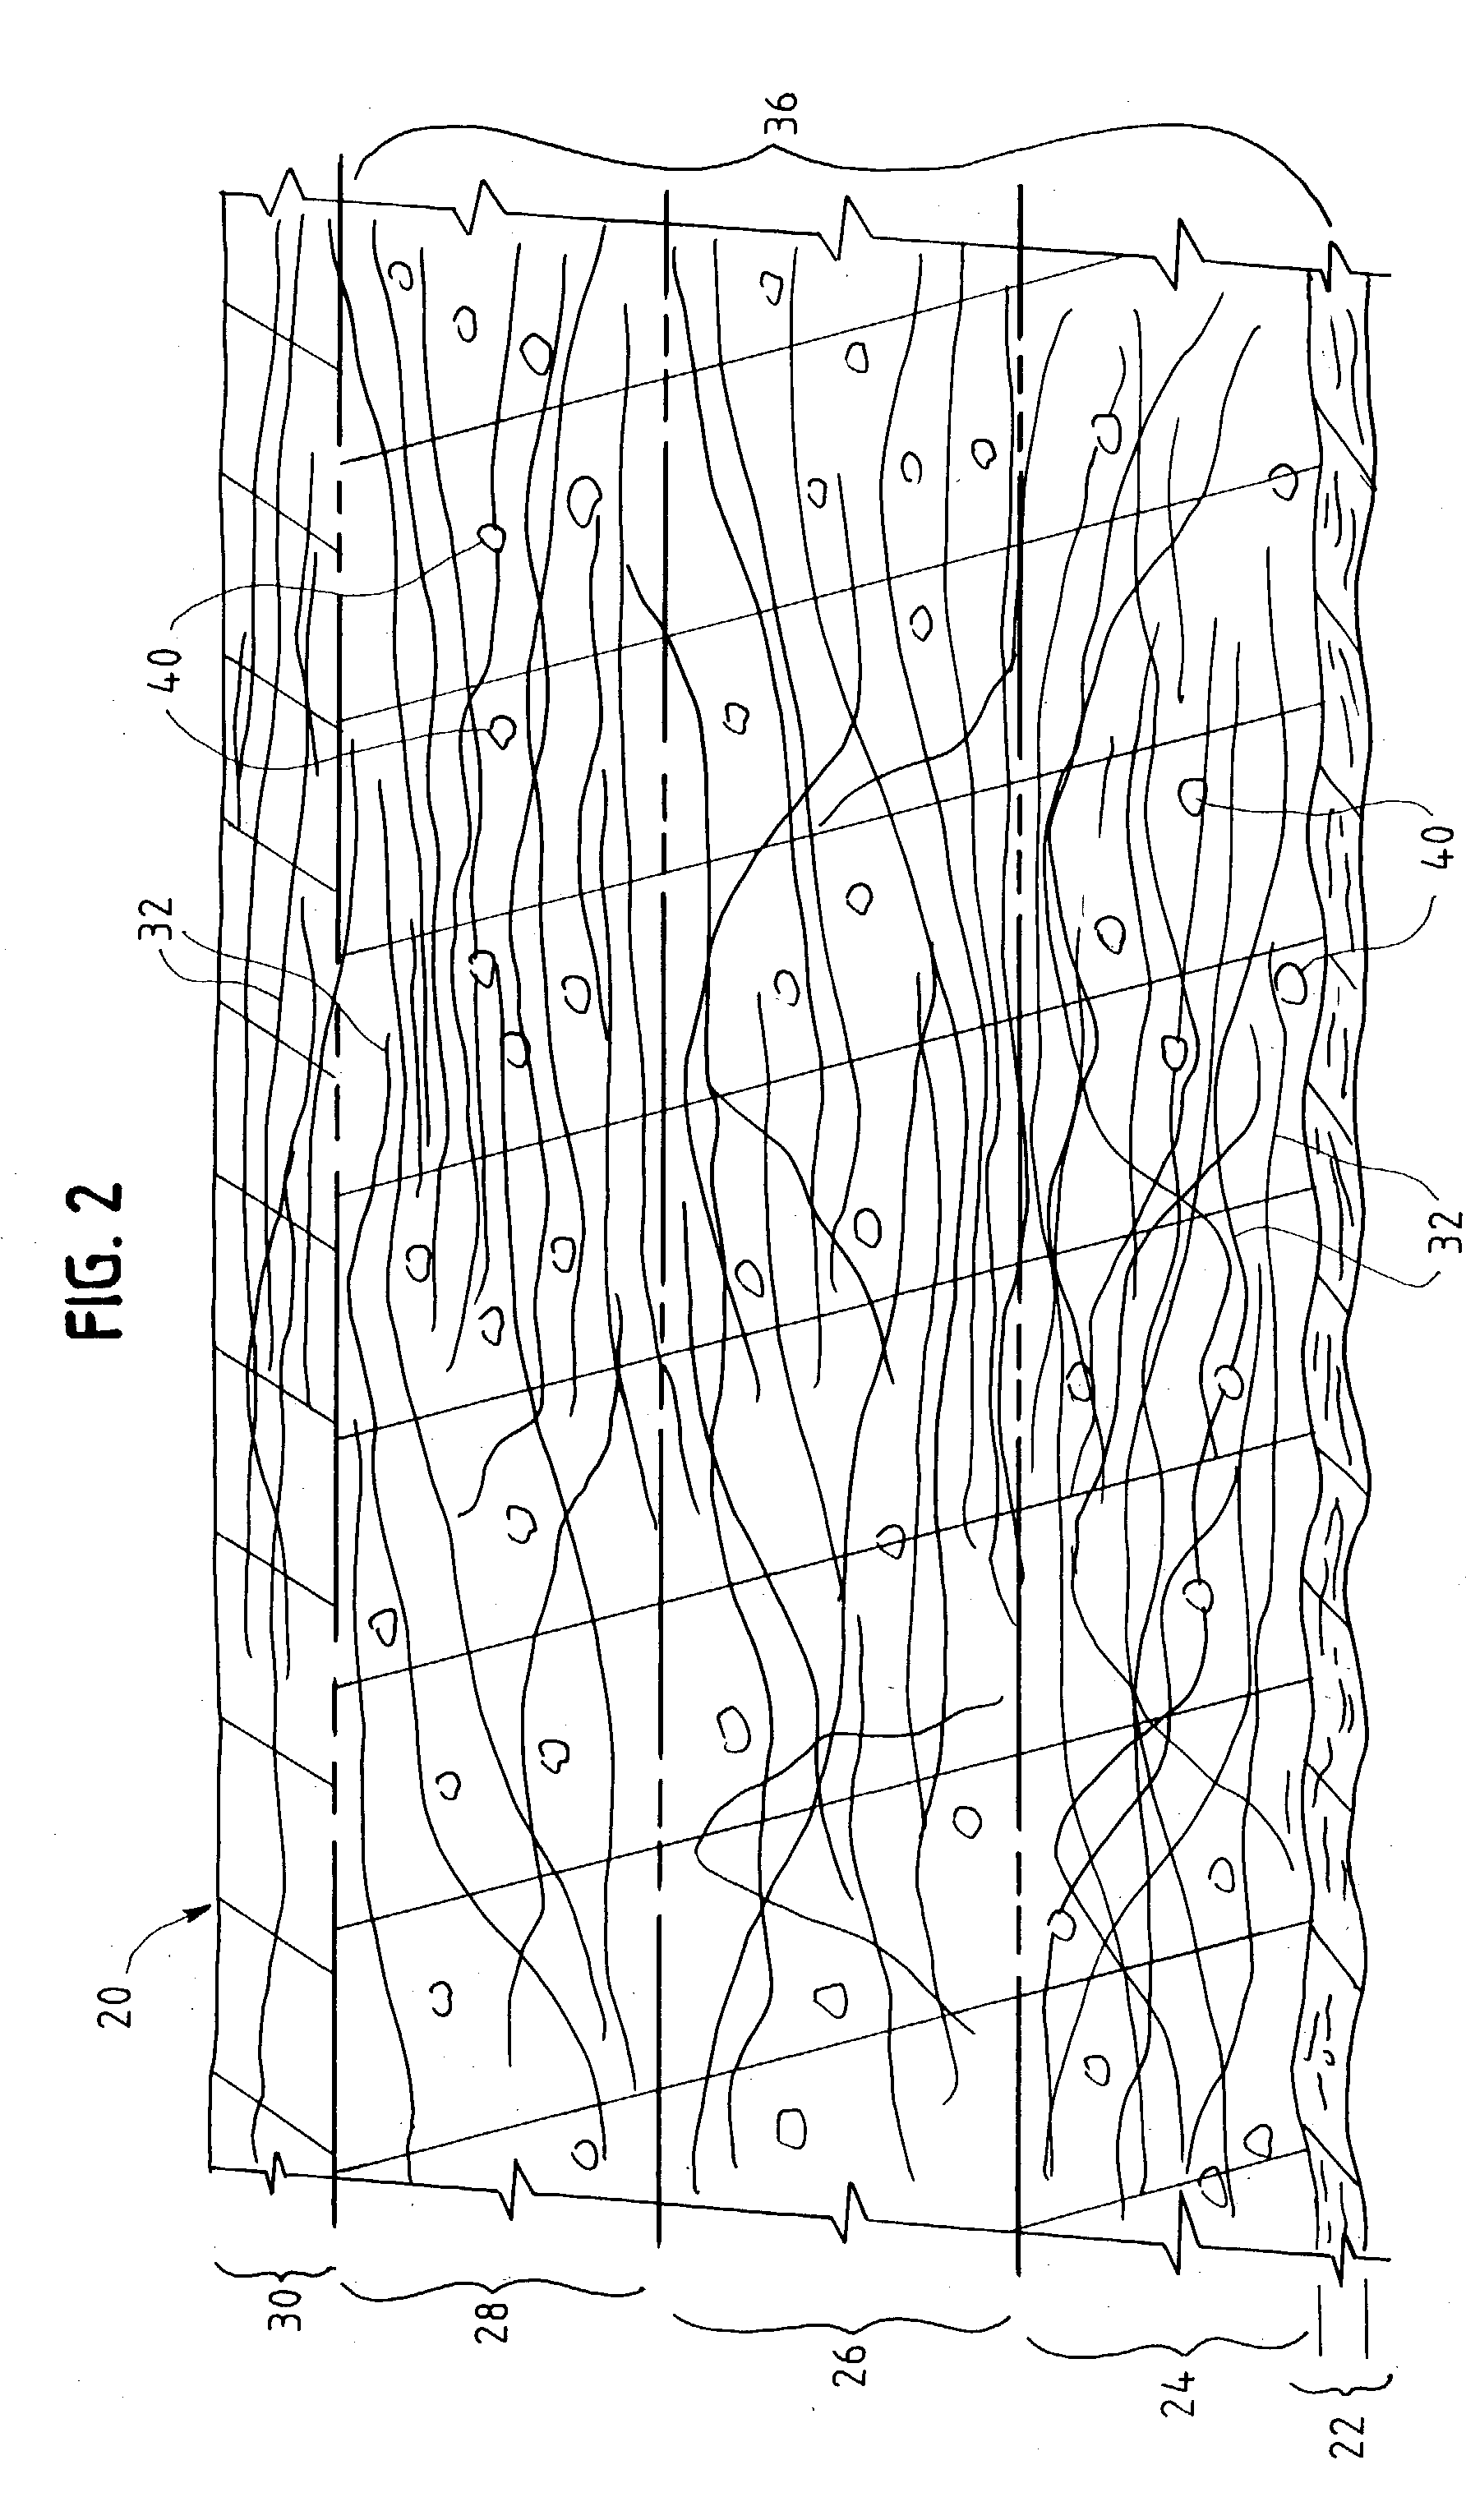 Soft, absorbent material for use in absorbent articles and process for making the material